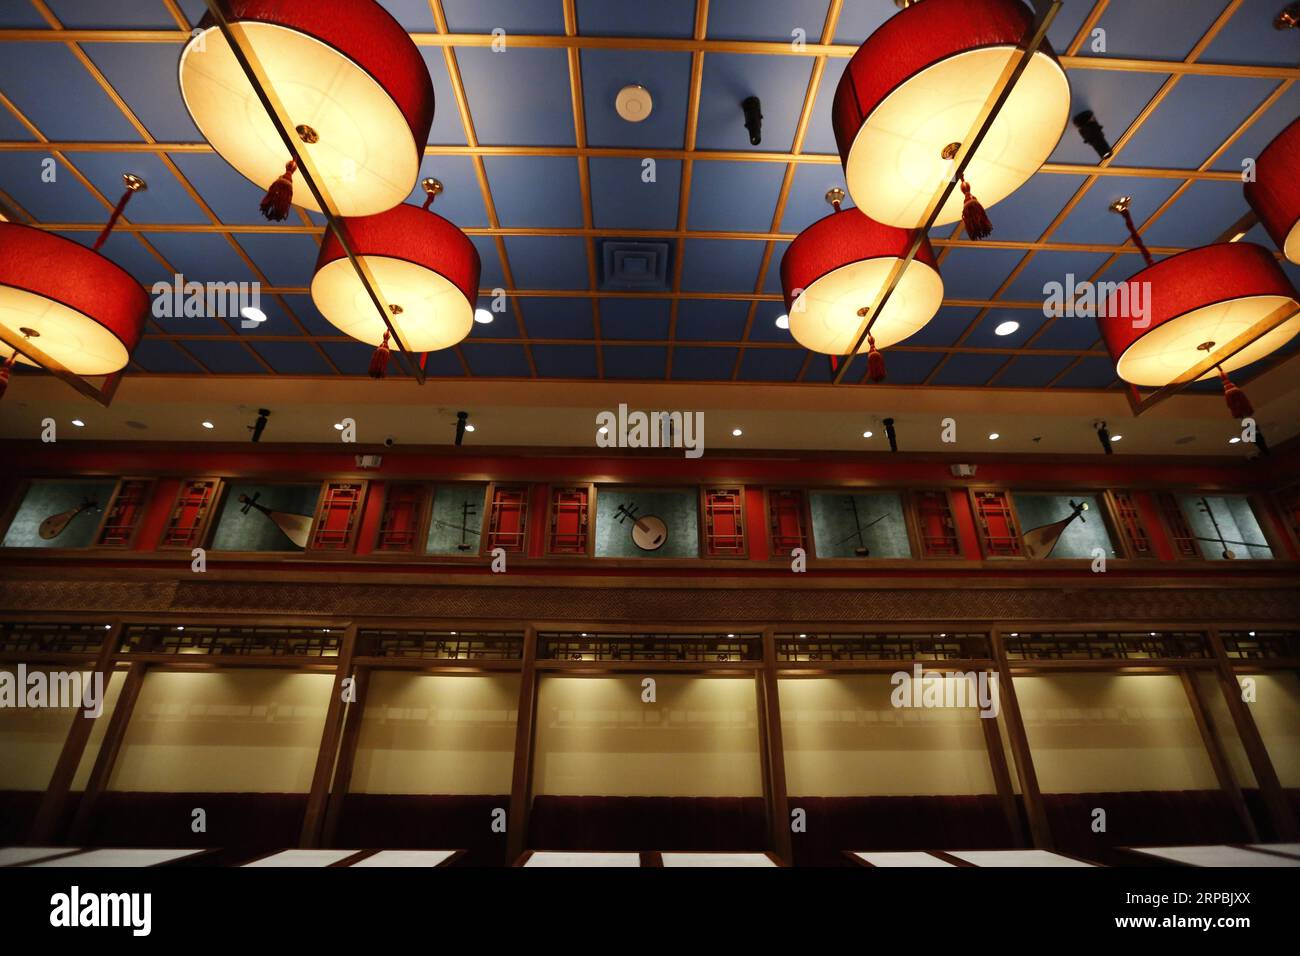 (190610) -- LOS ANGELES, June 10, 2019 (Xinhua) -- Photo taken on June 7, 2019 shows the interior view of Bistro Na s in Temple City, Los Angeles, the United States. Bistro Na s in Los Angeles made headlines this week with the announcement that it had been awarded a coveted Michelin Star by the famed Michelin Restaurant Guide. This special ranking broke Michelin s 10-year absence from Los Angeles, and made Bistro Na s the only Chinese restaurant in Southern California to be so honored. (Xinhua/Li Ying) U.S.-LOS ANGELES-CHINESE CUISINE-BISTRO NA S PUBLICATIONxNOTxINxCHN Stock Photo